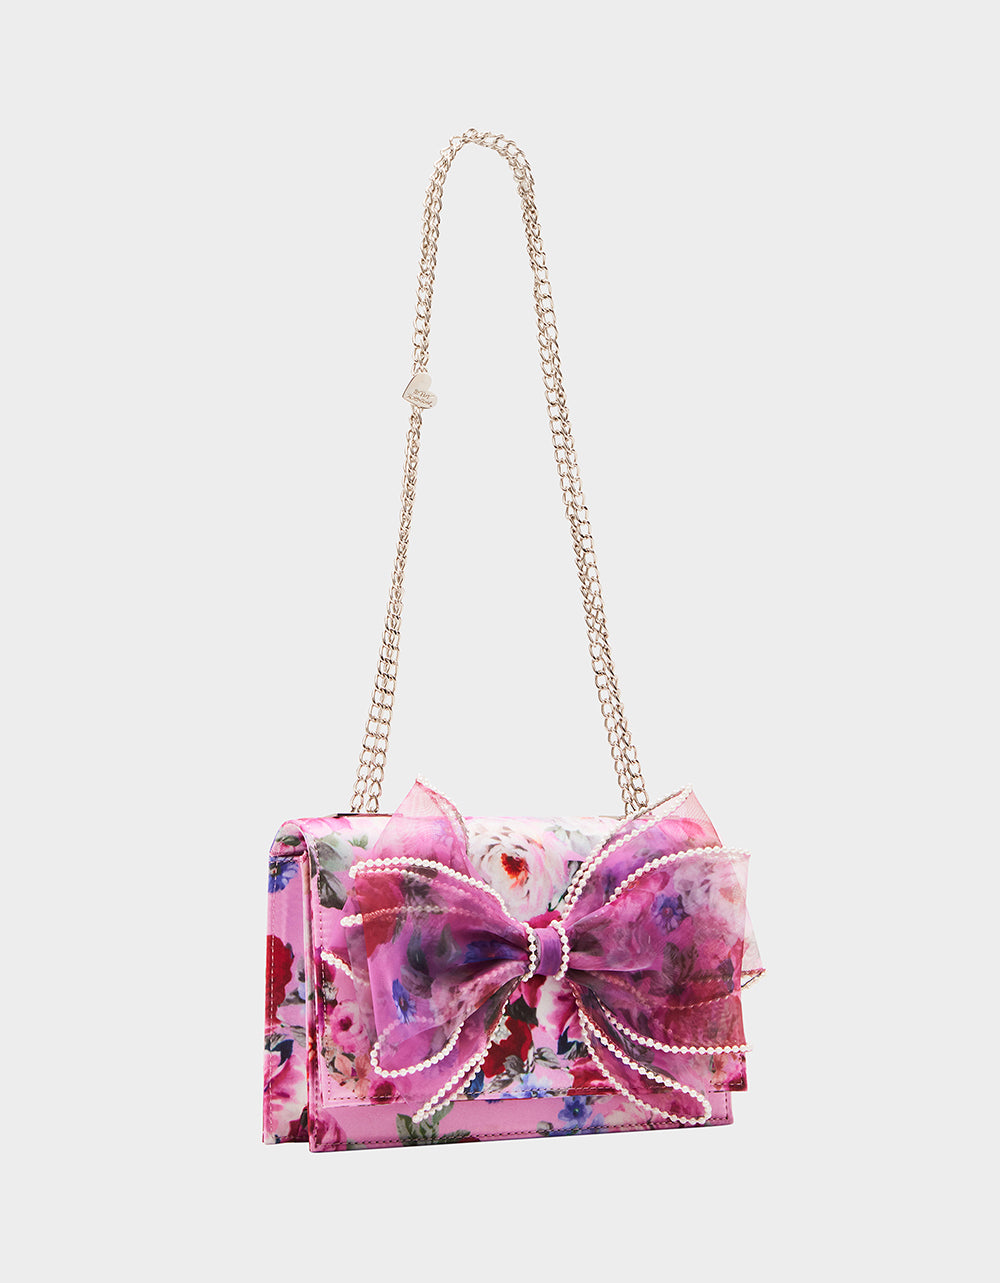 PEARL TRIMMED BOW BAG PINK